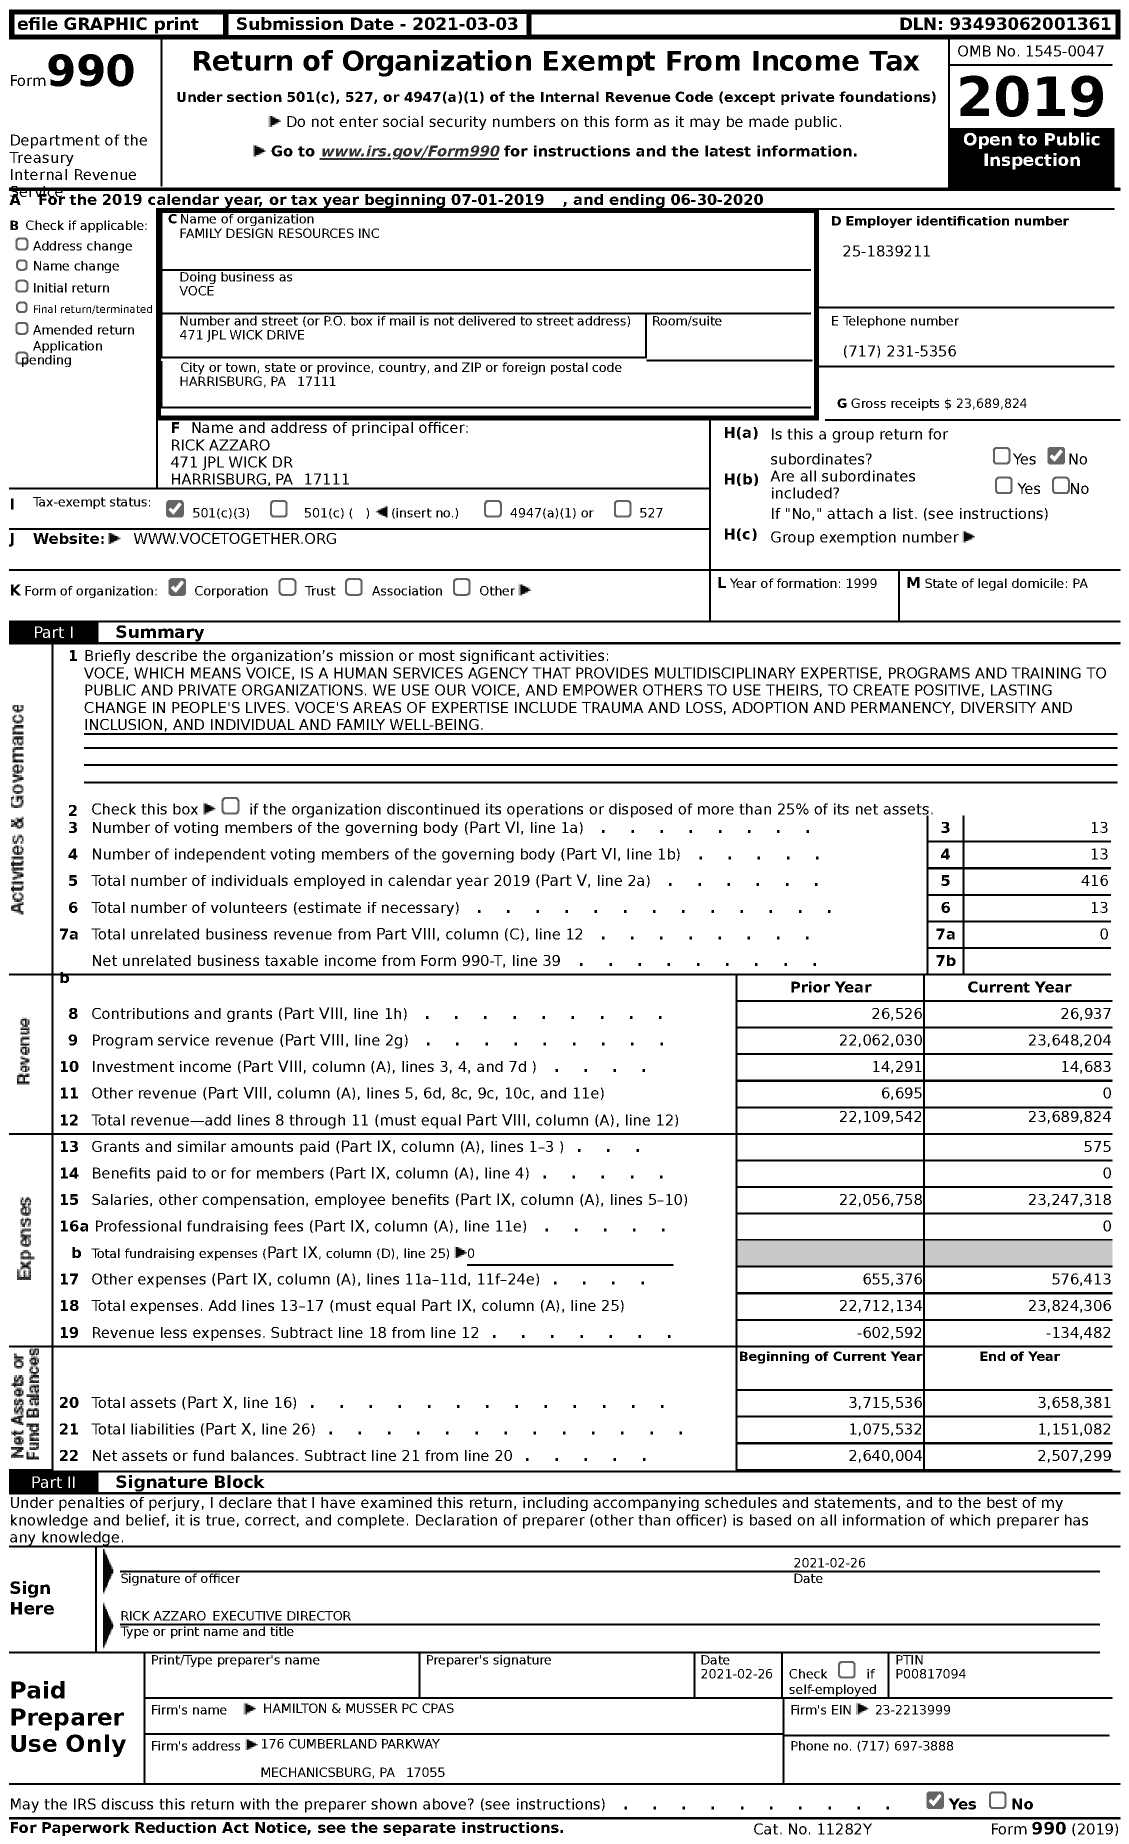 Image of first page of 2019 Form 990 for Voce / Family Design Resources Inc (FDR)